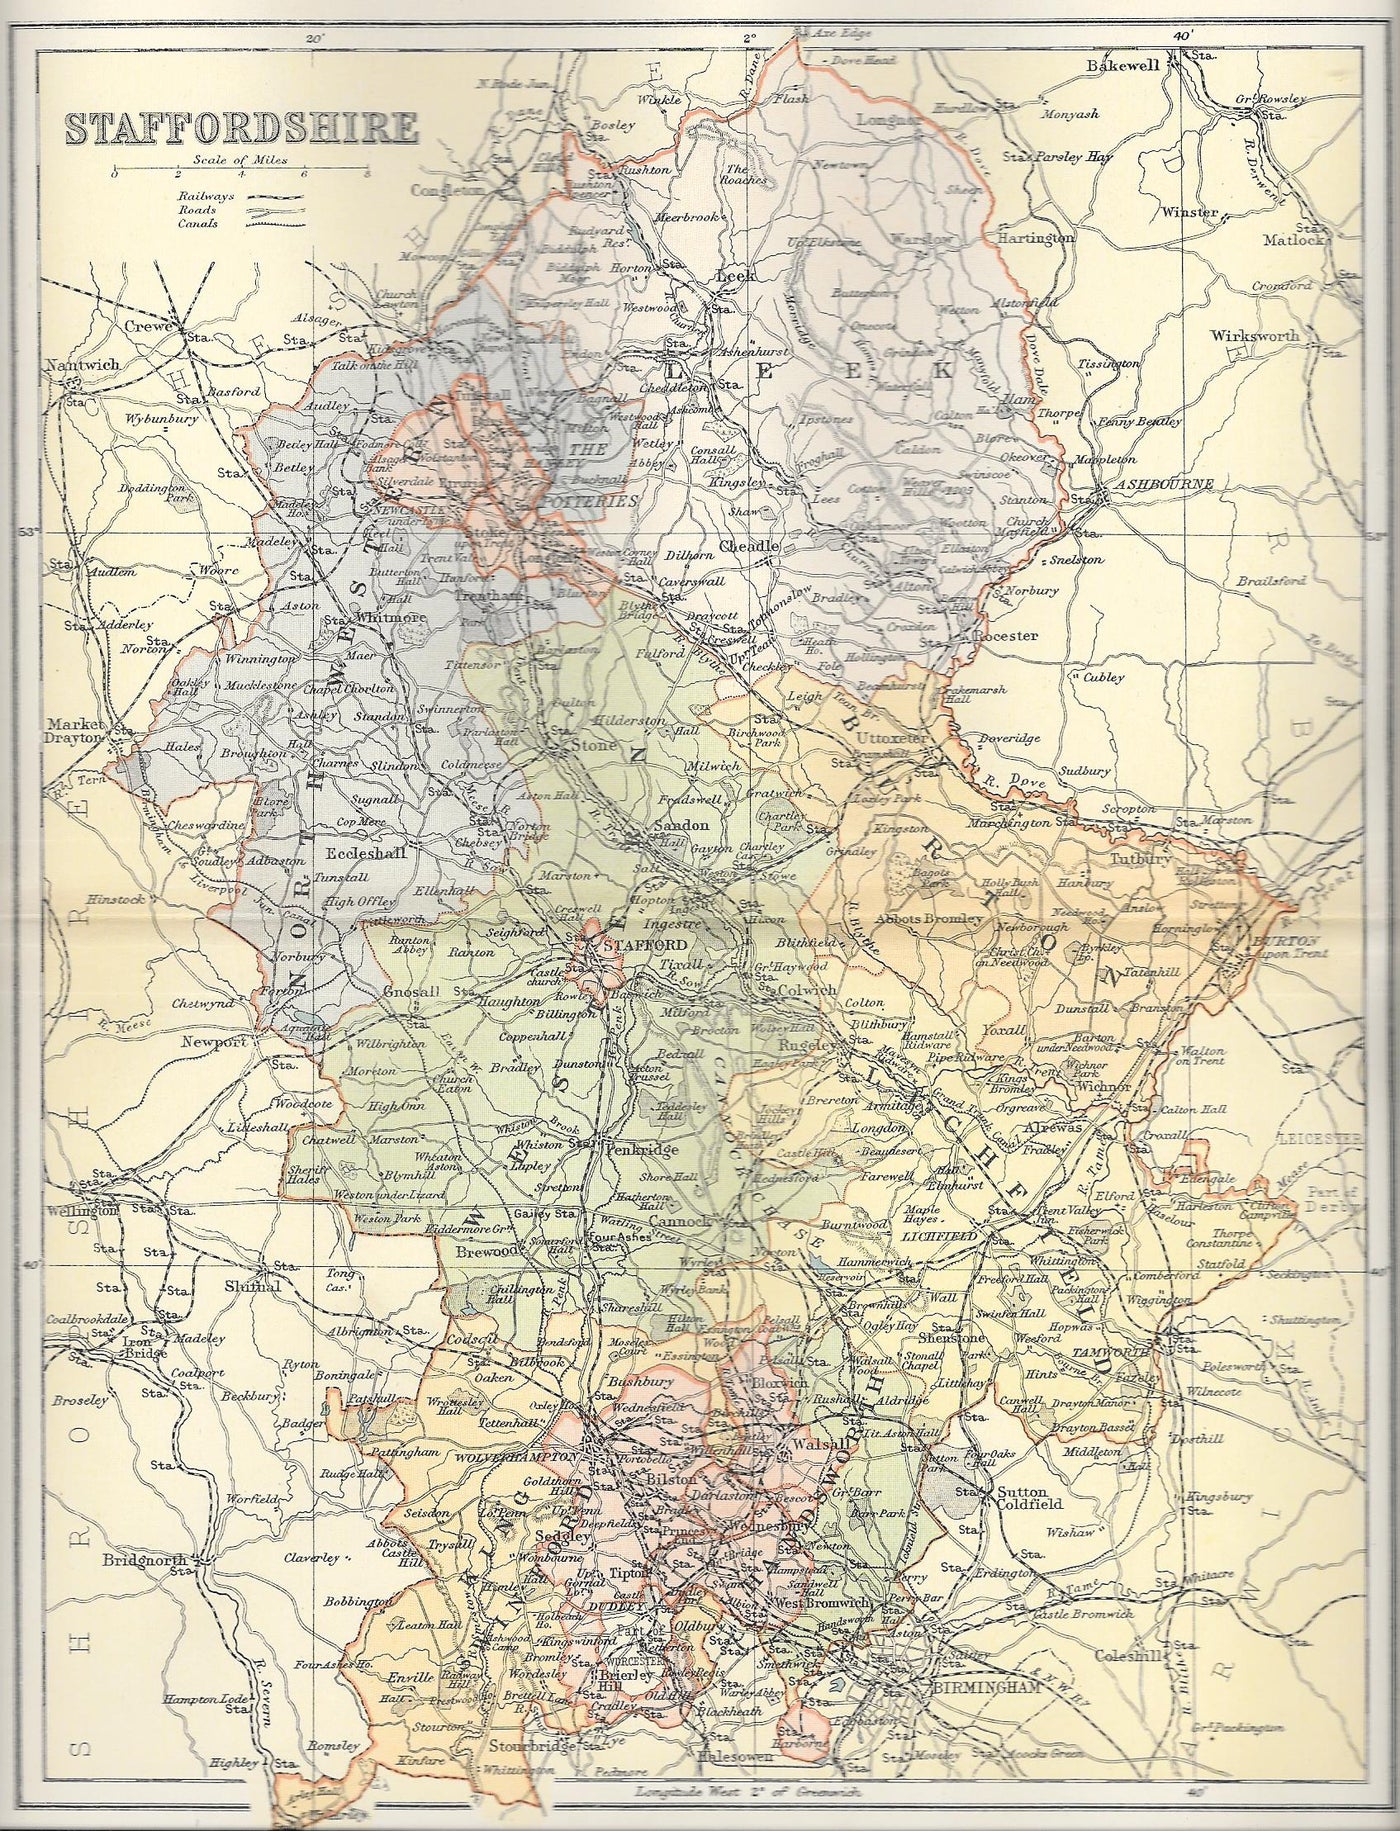 Staffordshire antique map published 1895